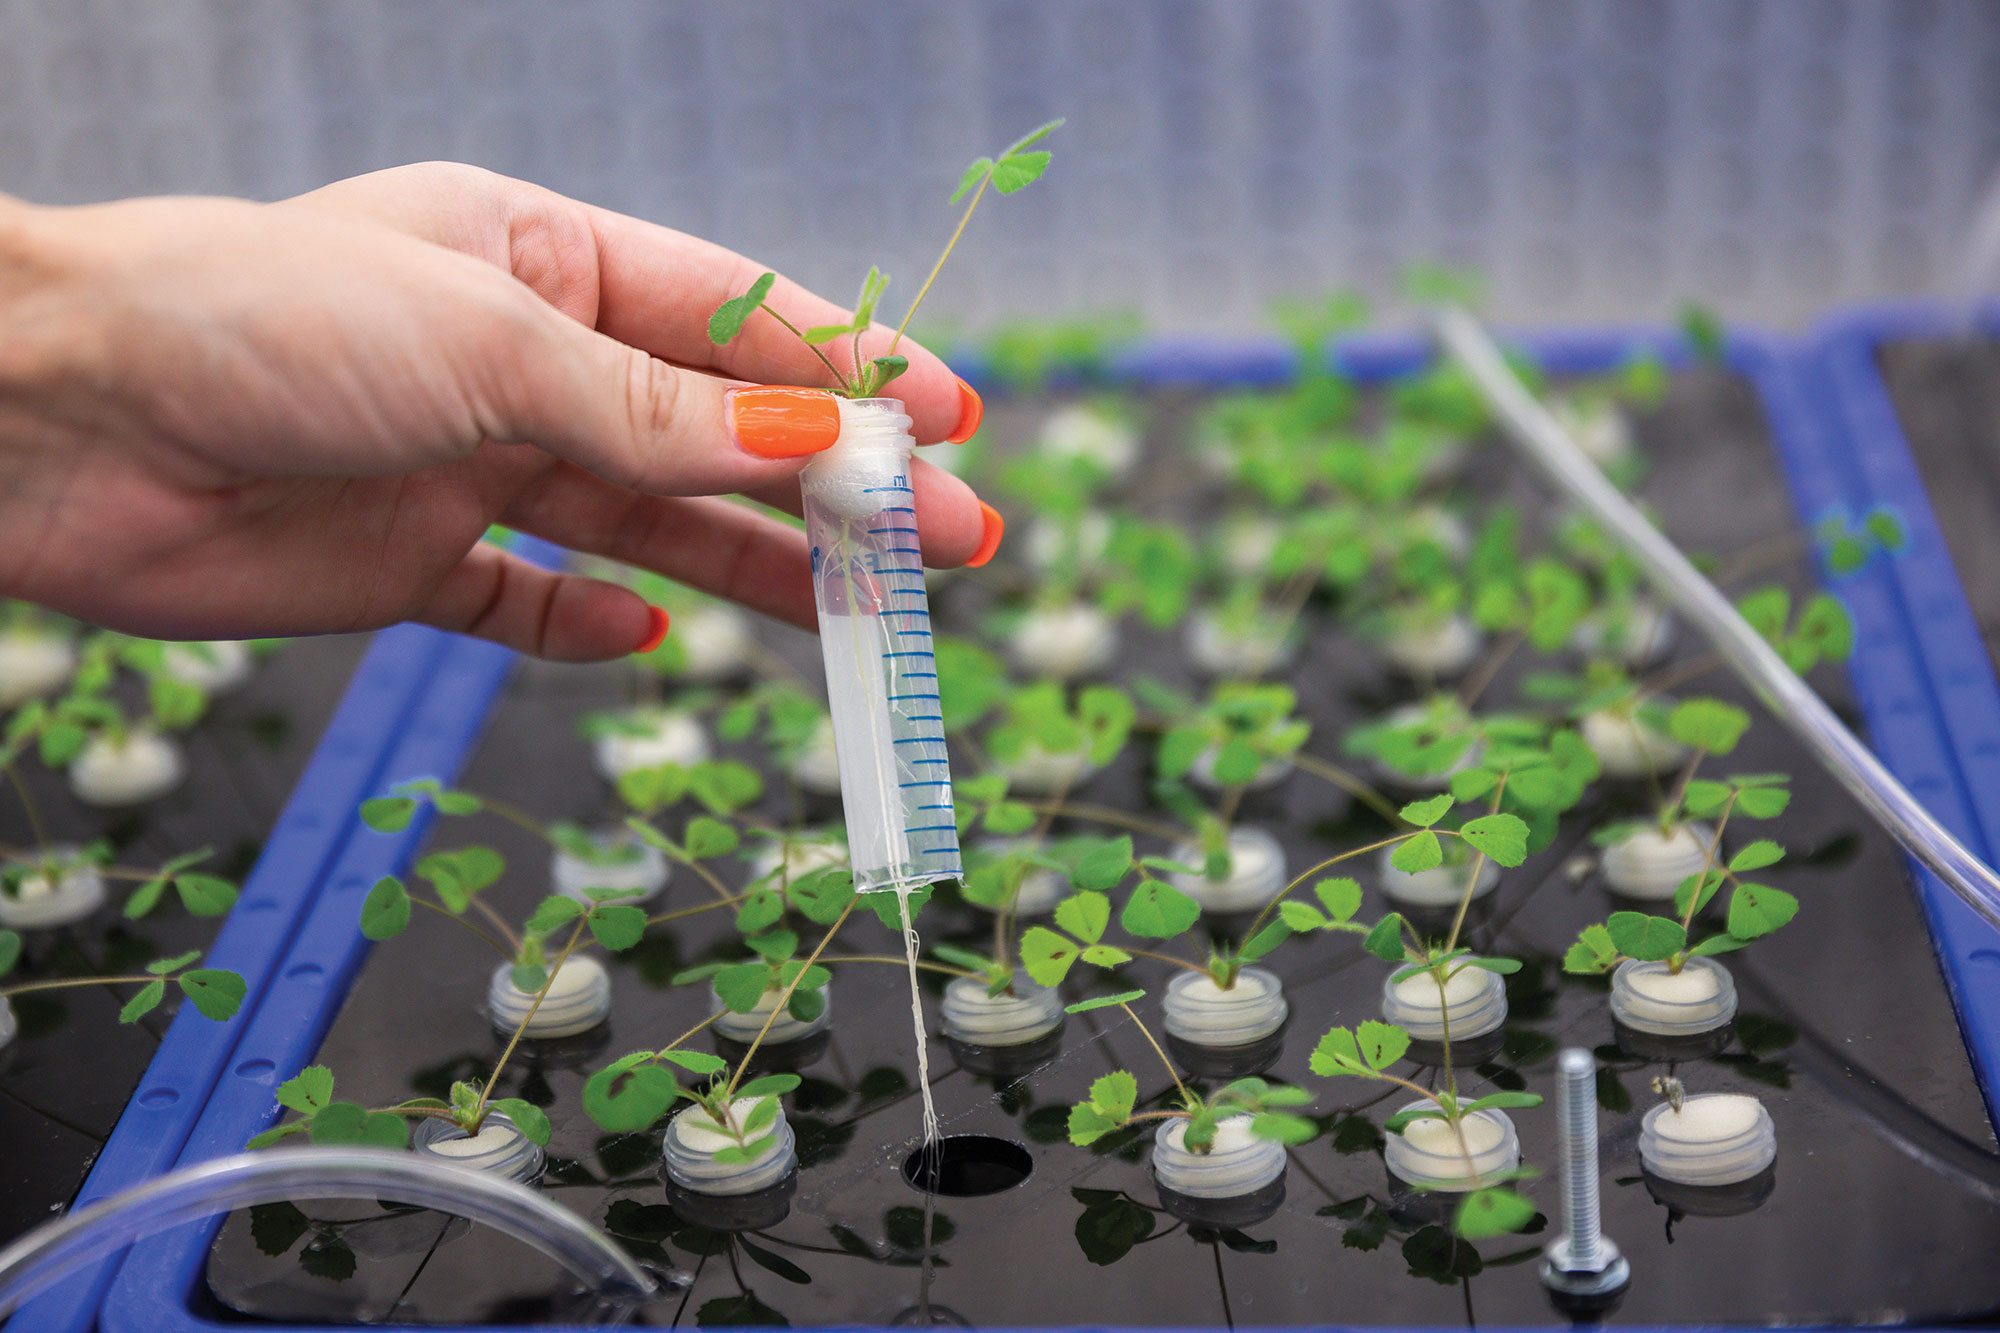 Medicago truncatula grows in hydroponic, or water-based, tanks before peptides are introduced. This allows researchers to understand the influence of solely peptides on the plant roots’ ability to take up nutrients.